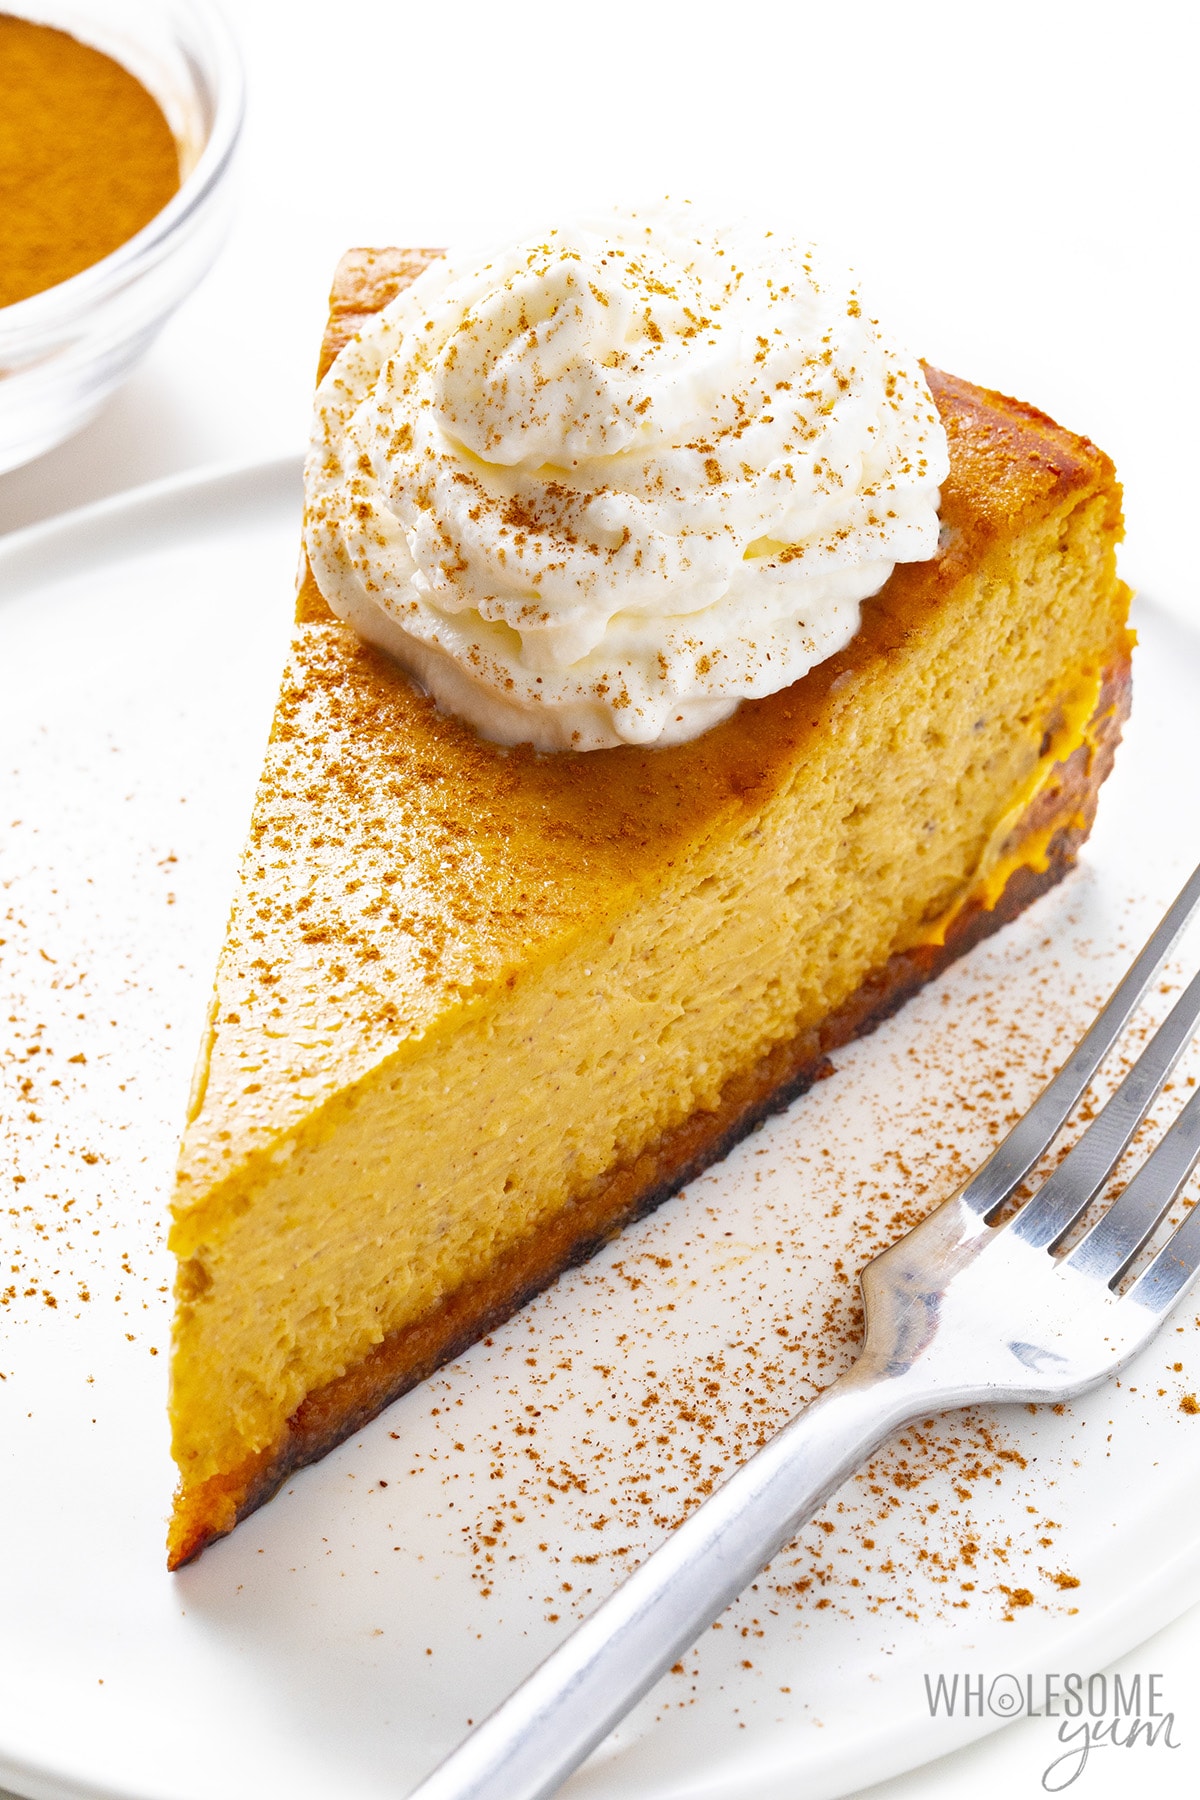 Place a slice of sugar-free pumpkin cheesecake on a plate with a fork.